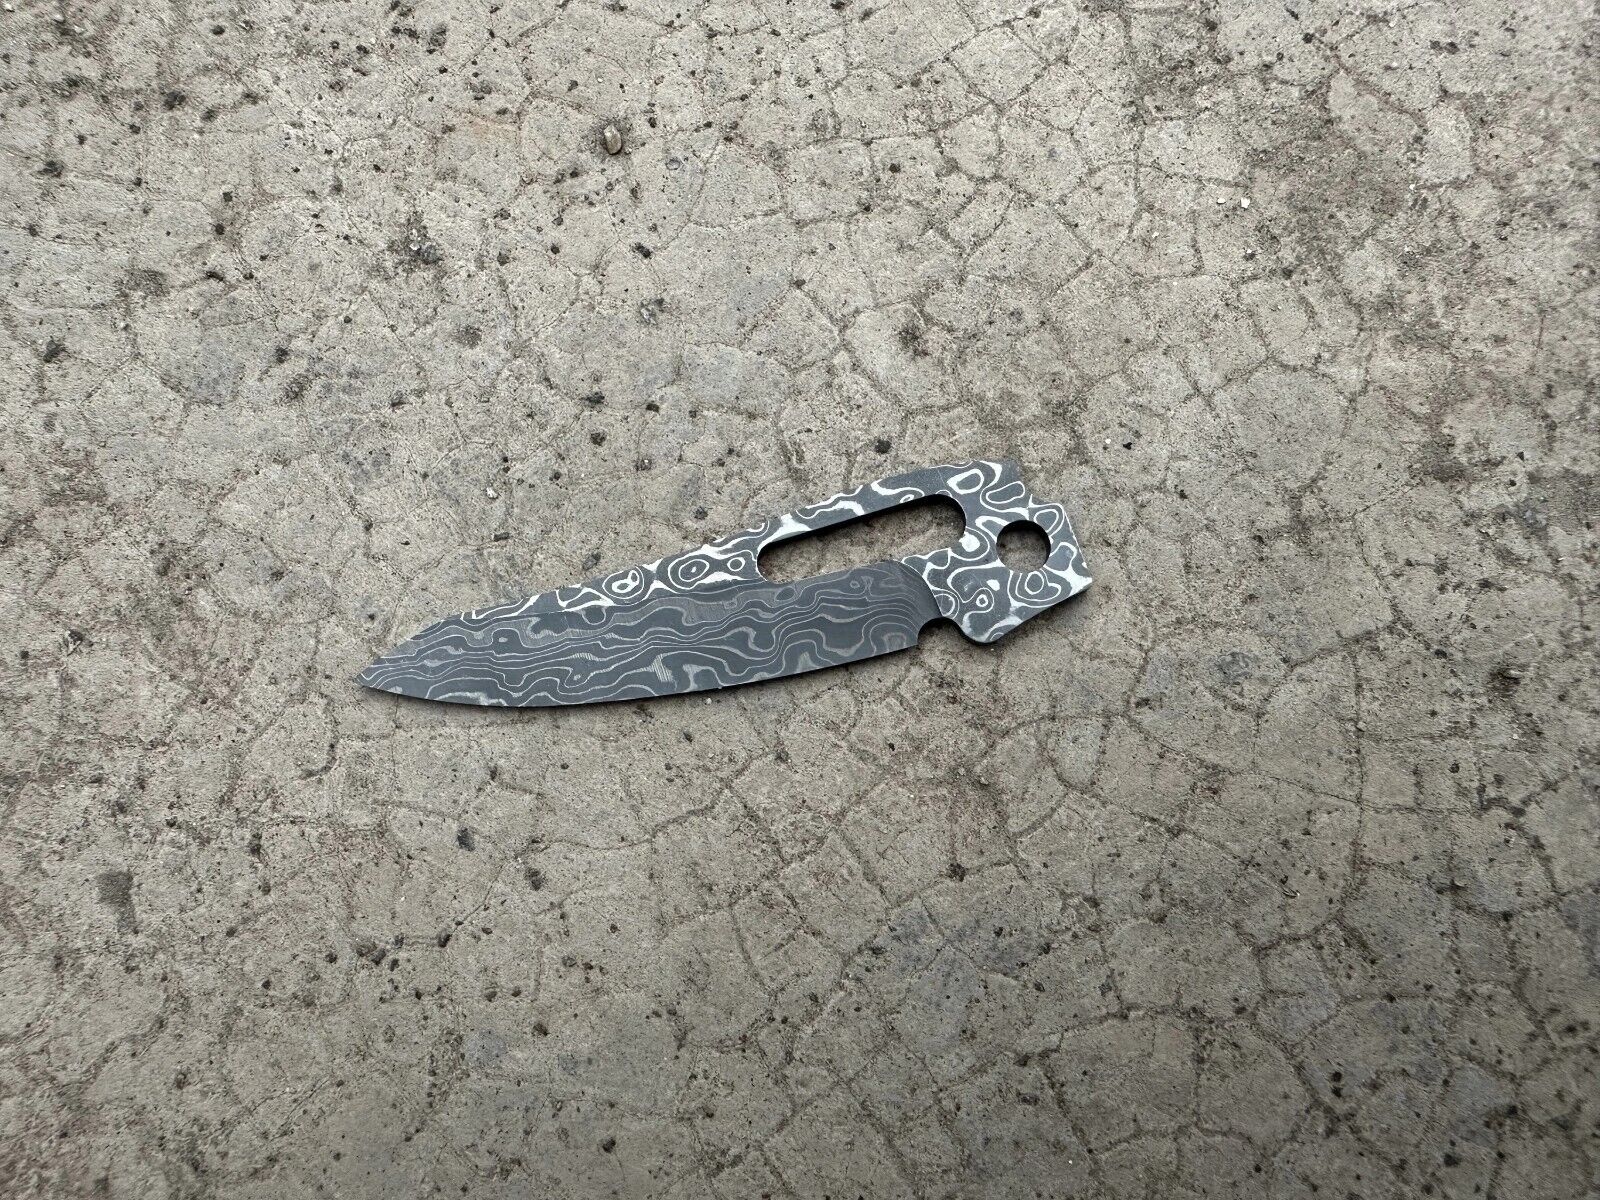 1 Piece Replacement Damascus Steel Blade for Leatherman Skeletool Modify